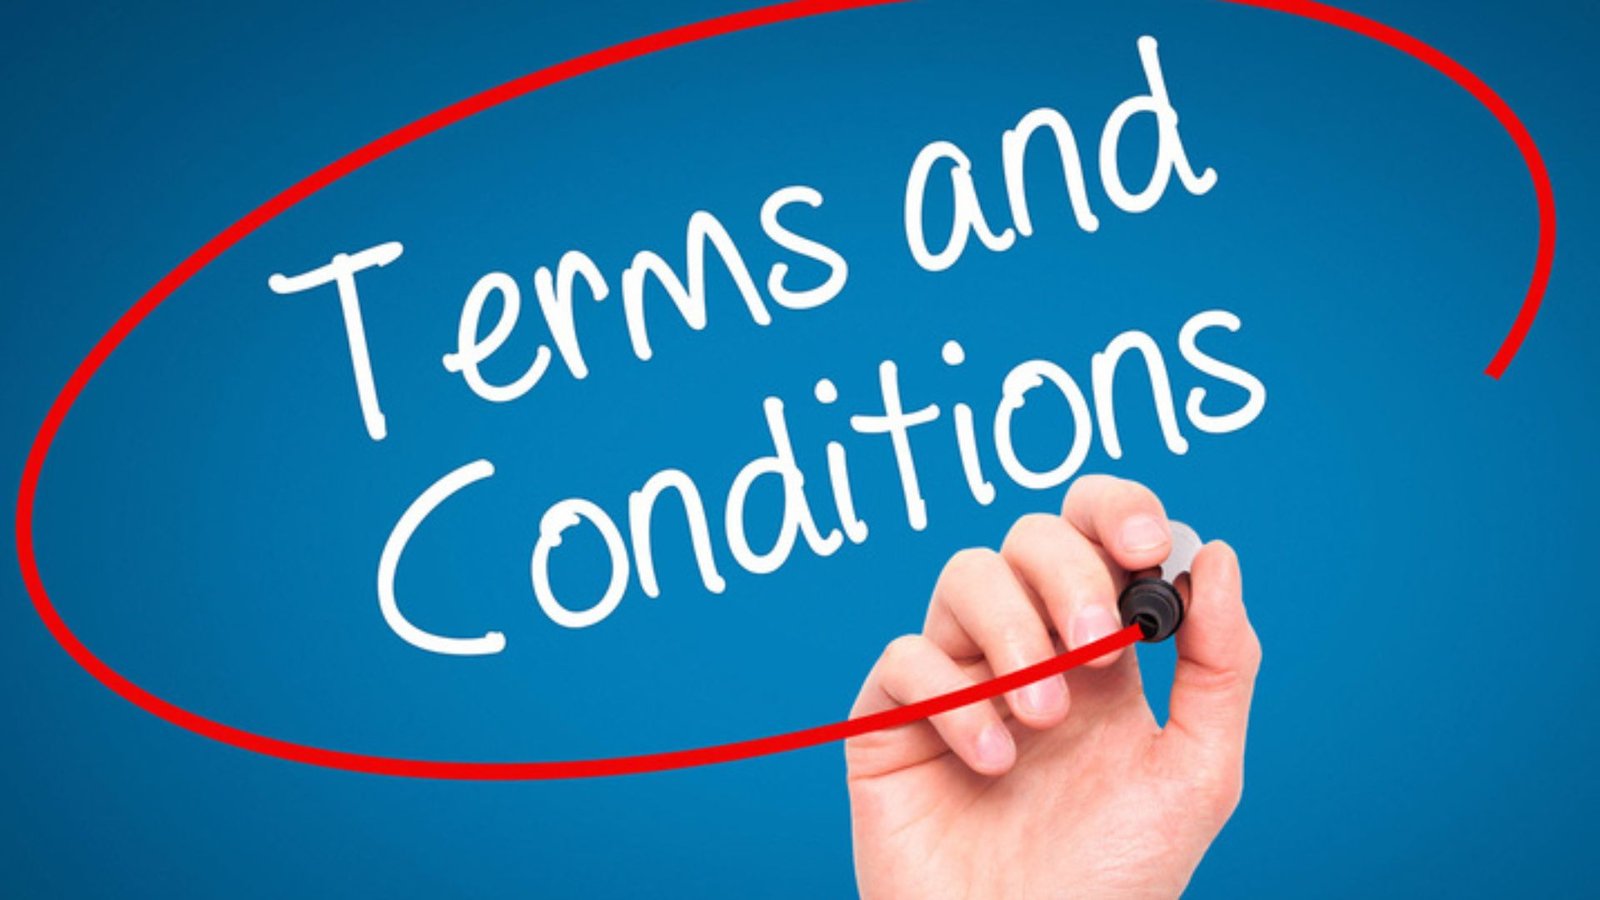 this picture shows Terms and Conditions